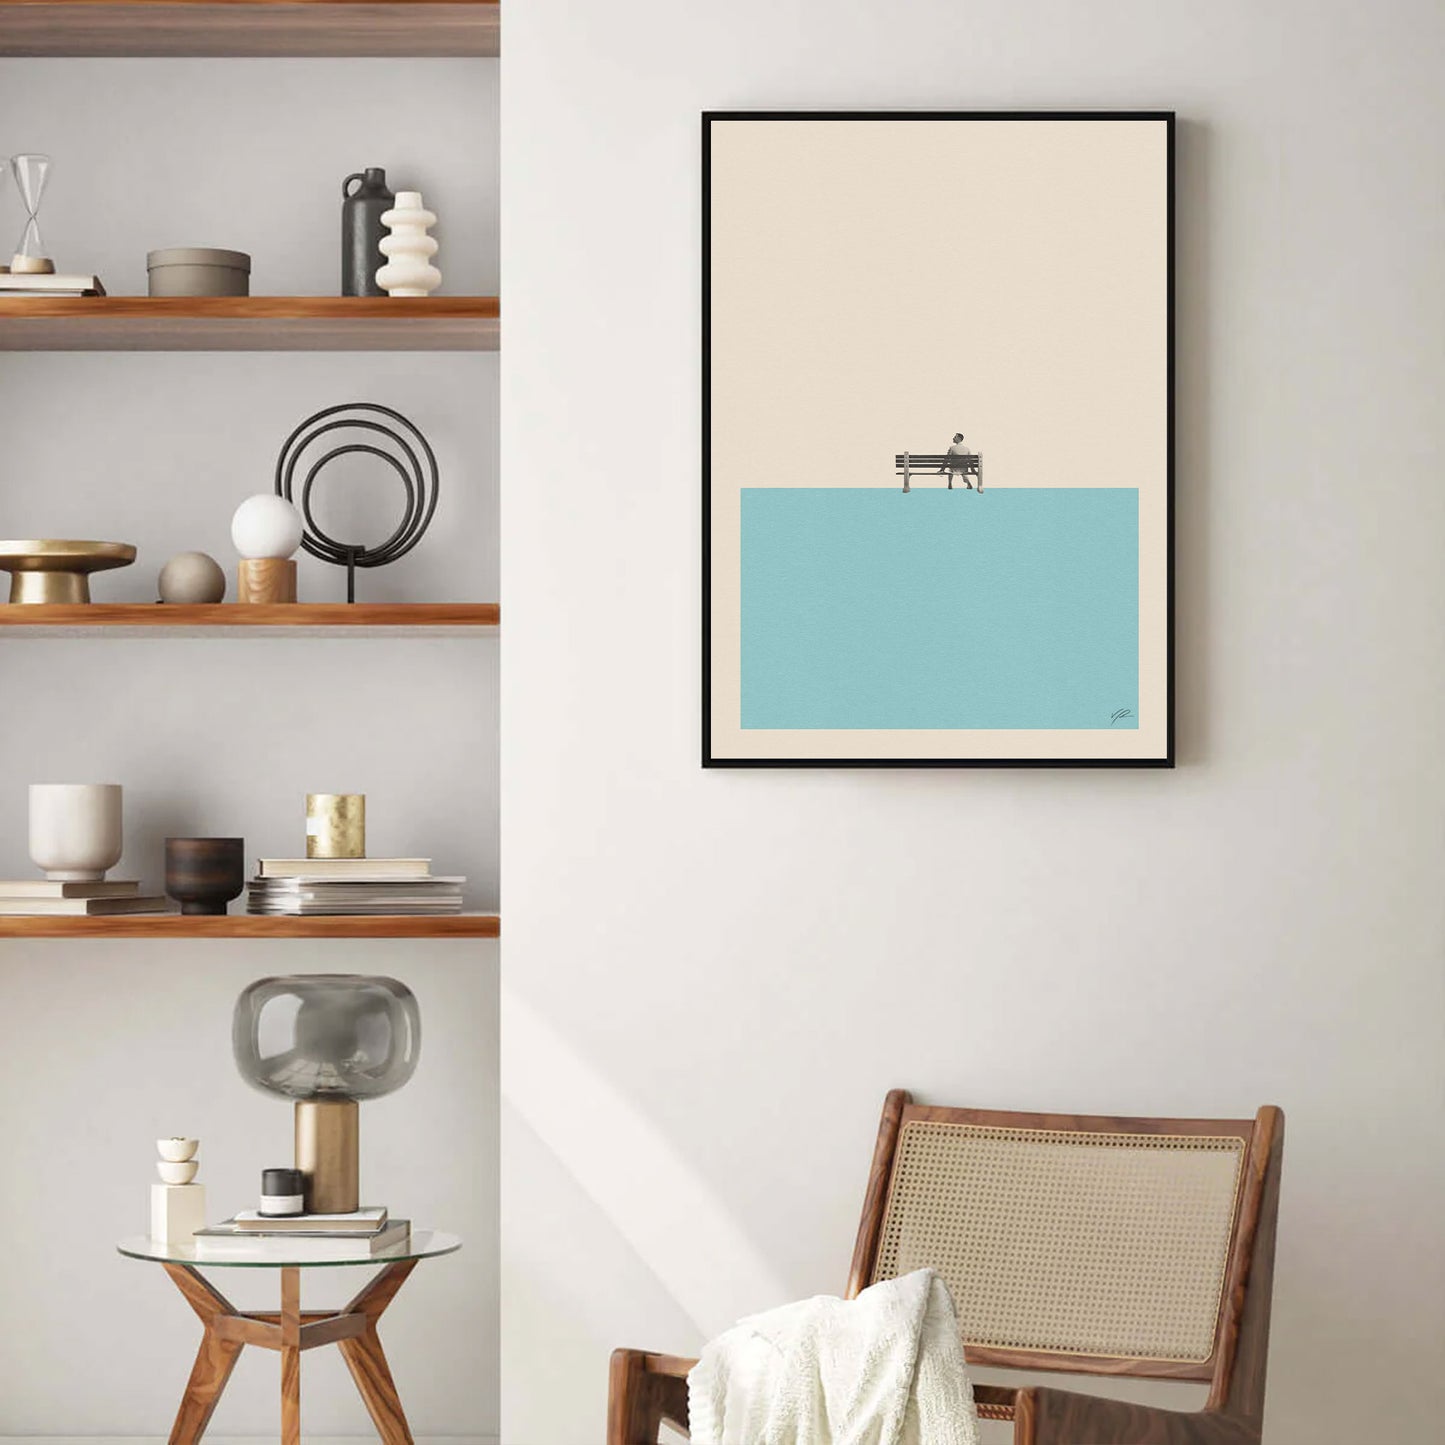 A living room with a museum quality framed print of "Forrest Gump" by thewallflowerclub on matte paper.